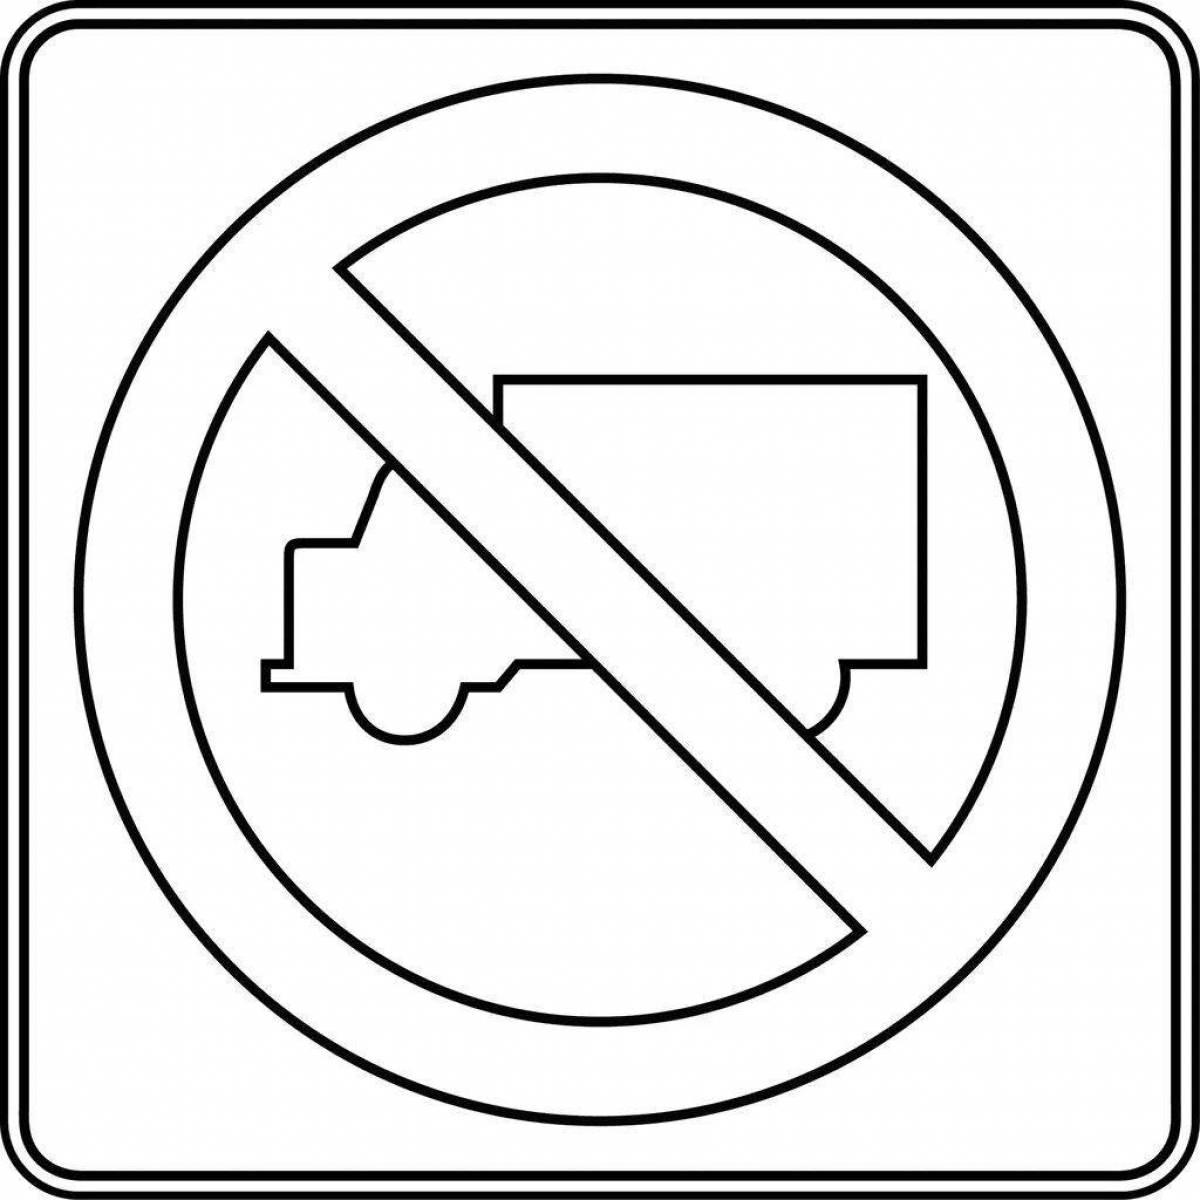 Radiant no entry sign coloring page